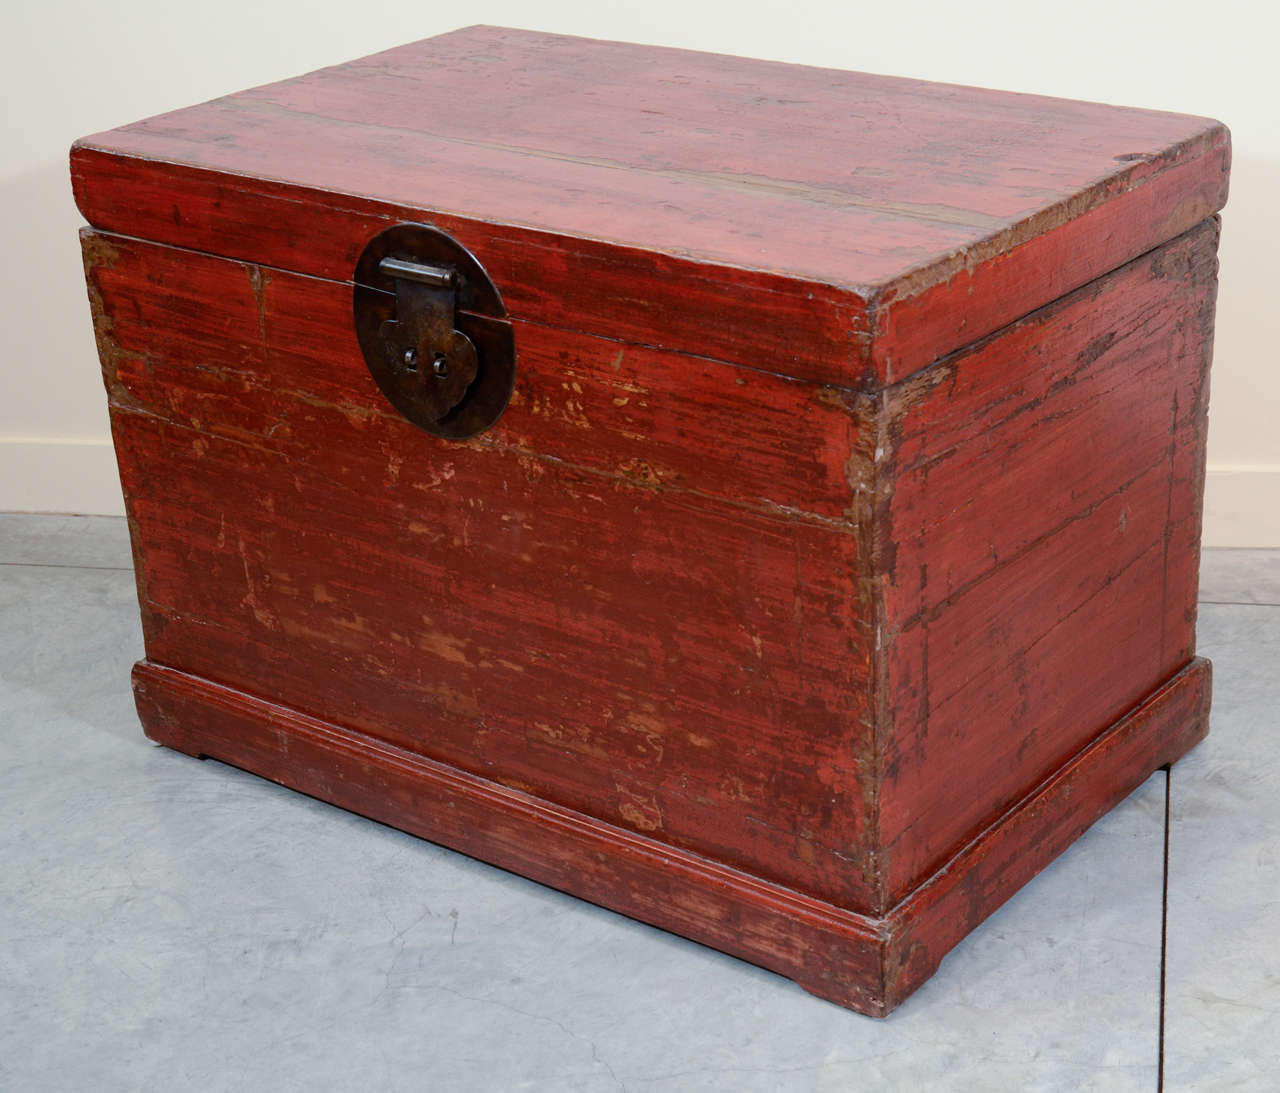 A nicely worn red elm Chinese clothing trunk, circa 1880, from Shanxi Province.

